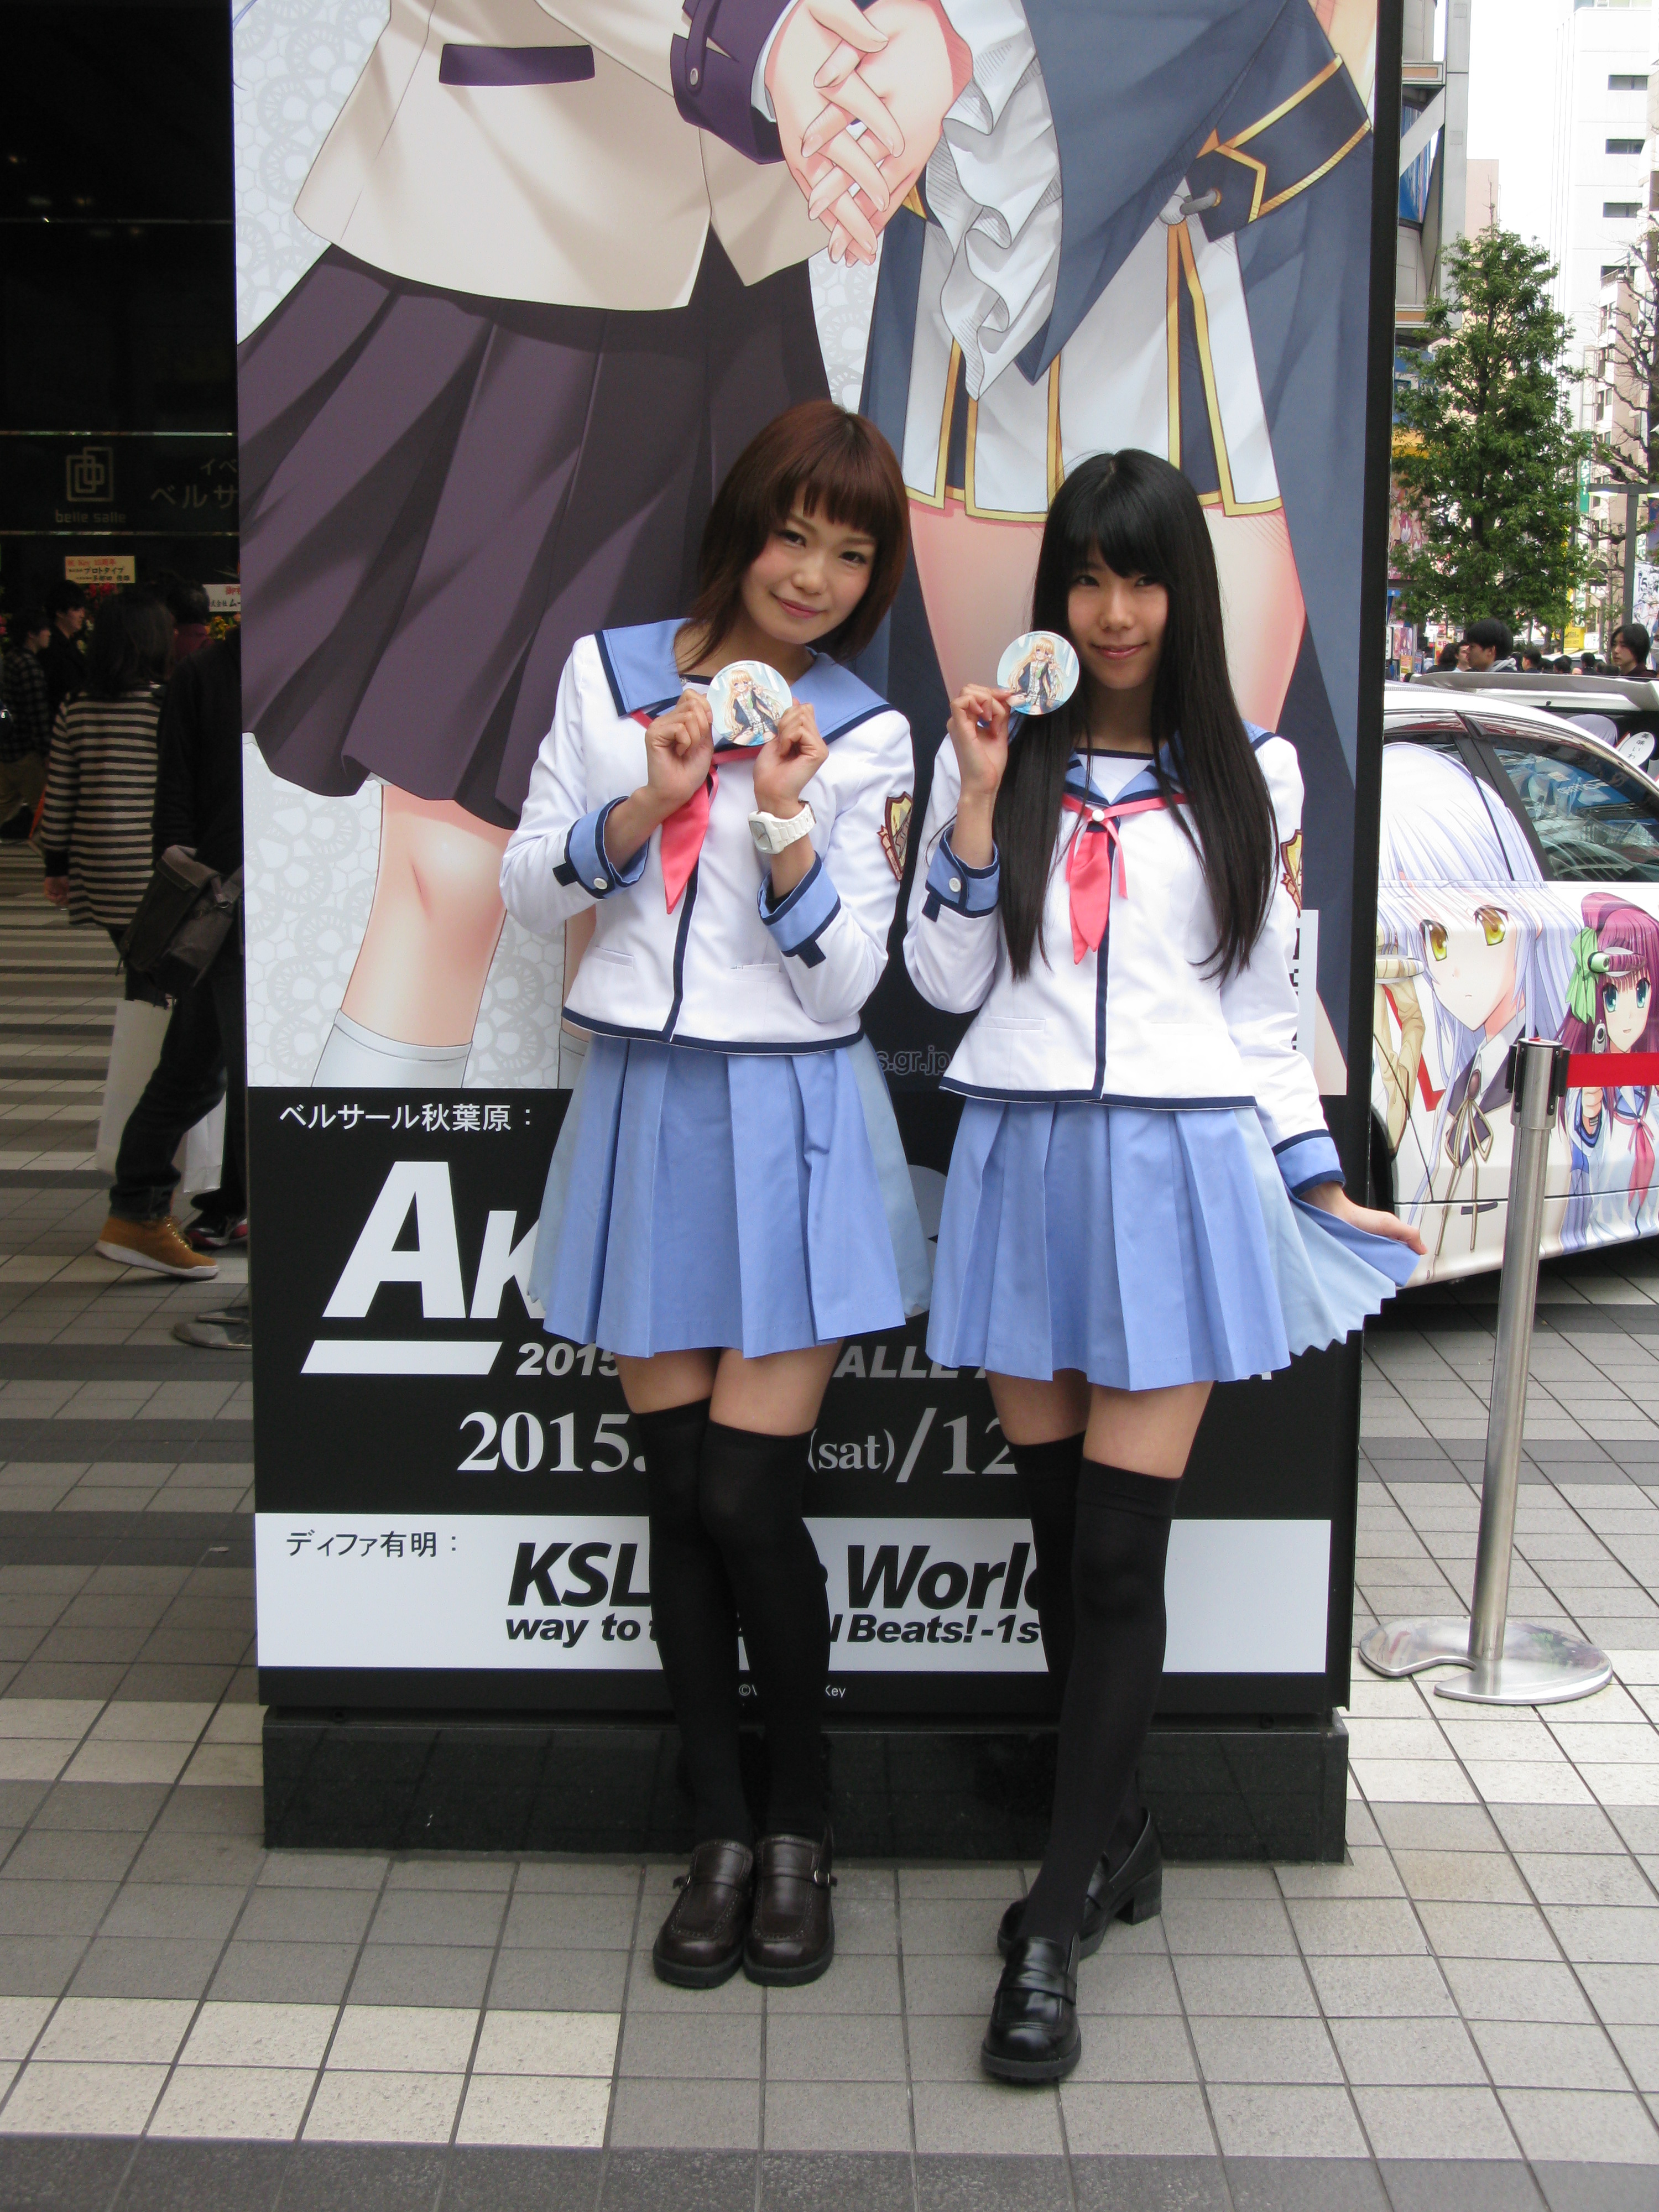 These are promotional girls, but their clothes are nothing unusal.  